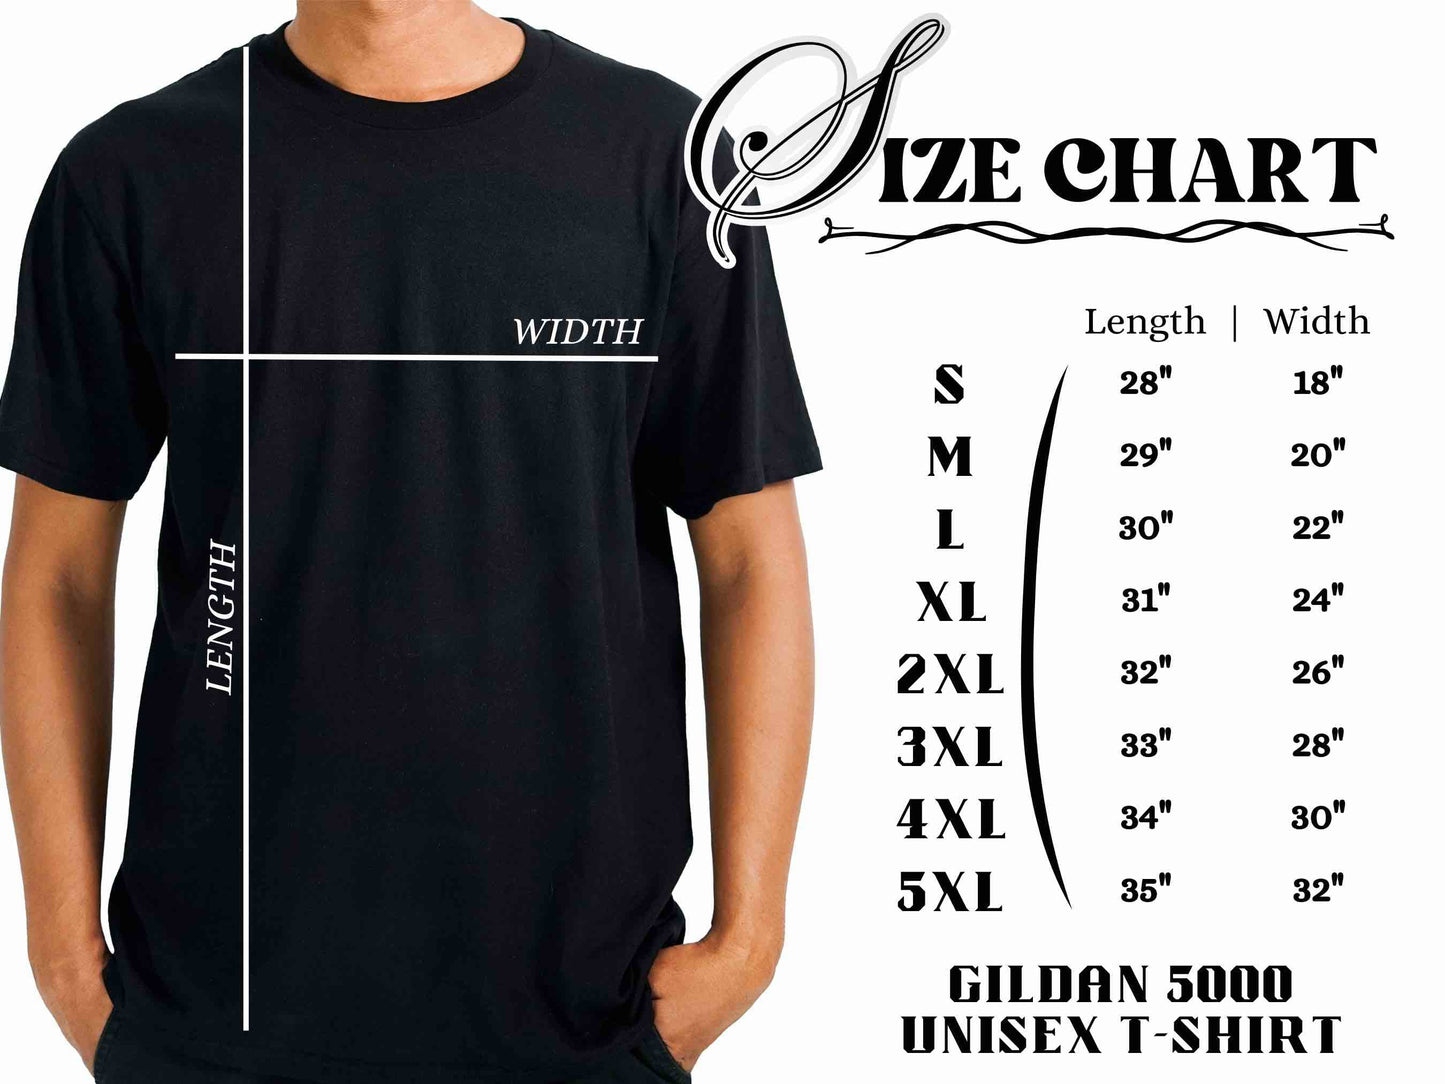 size chart for Gildan 5000 mens t-shirt in inches